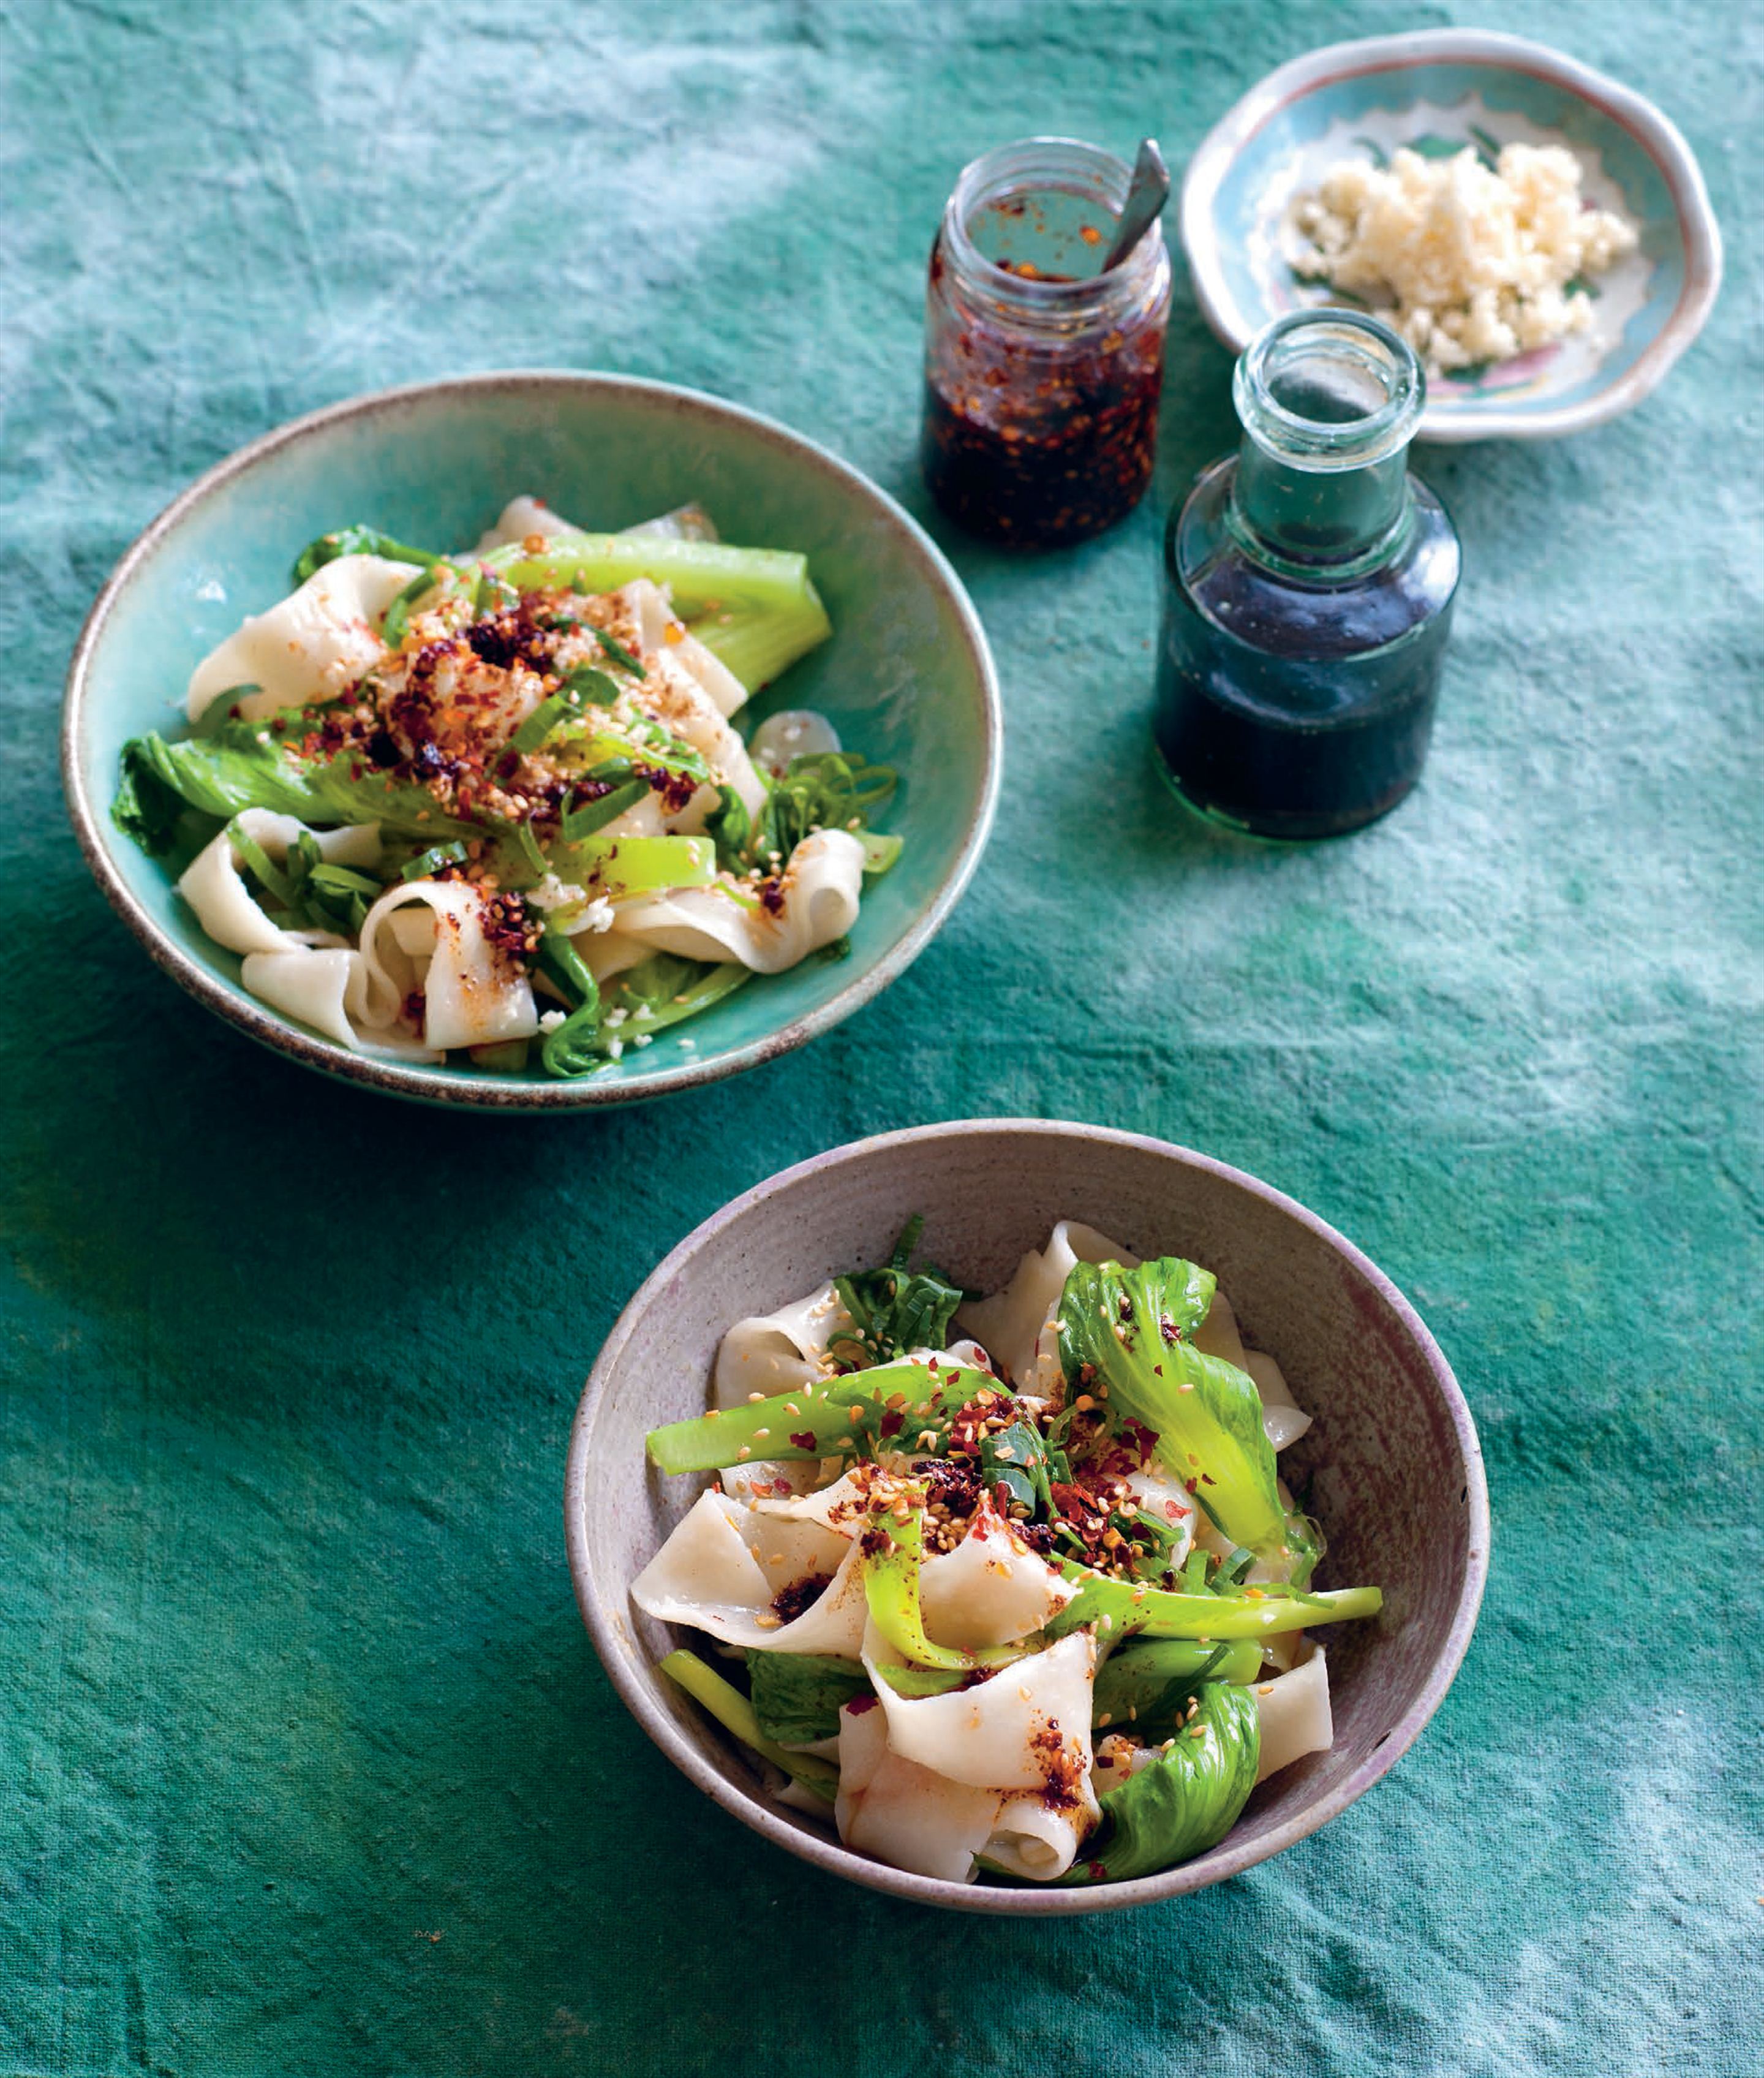 Hand-cut noodles with mustard greens, vinegar and chilli